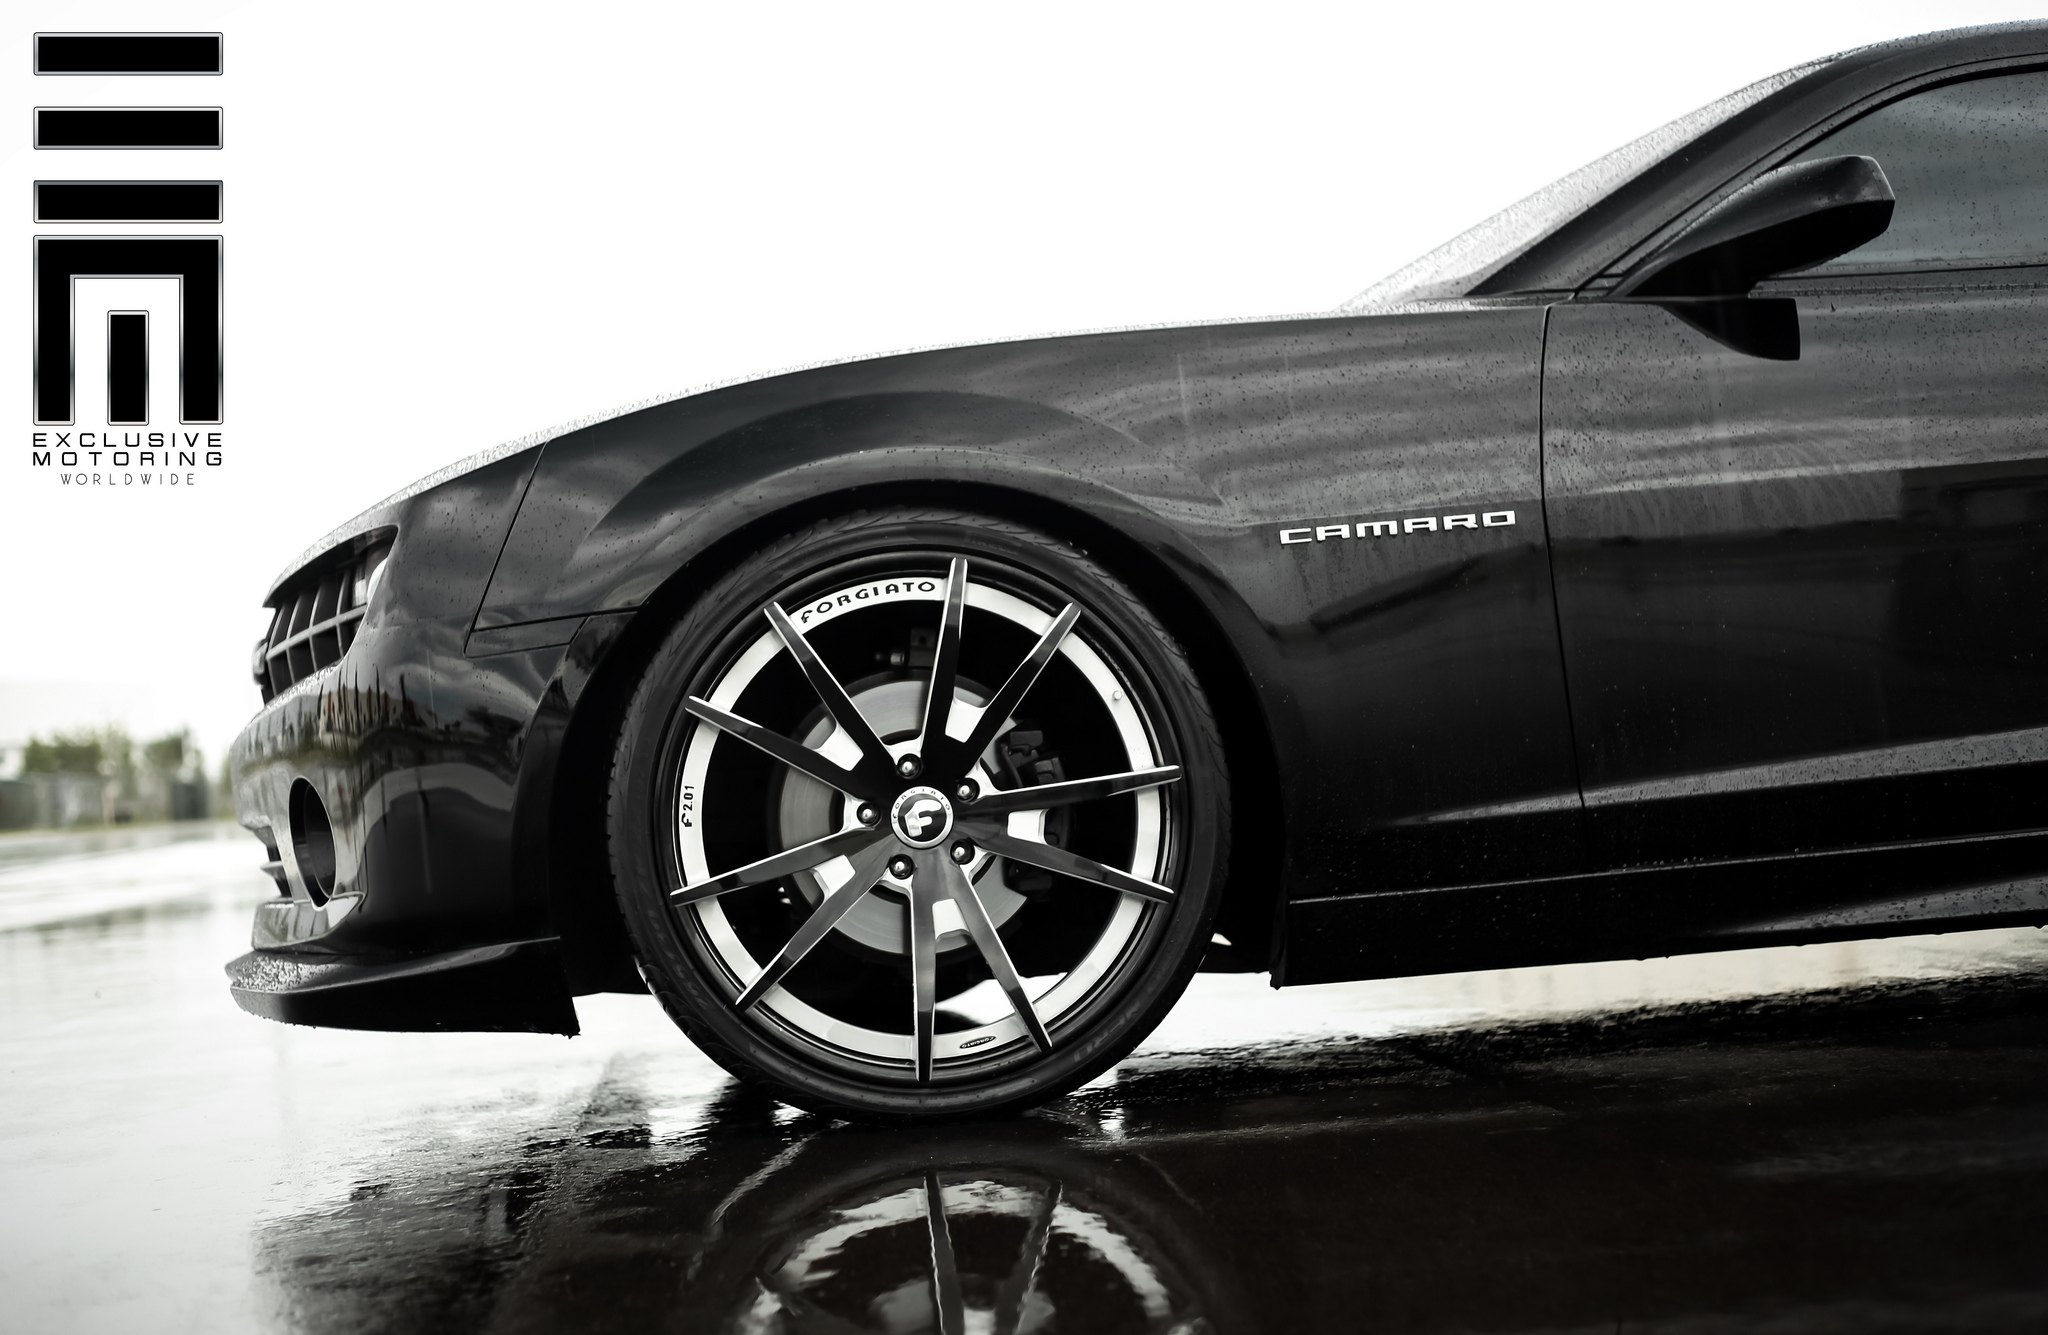 Forgiato multispoke wheels on Chevy Camaro SS with ground effects - Photo by Exclusive Motoring